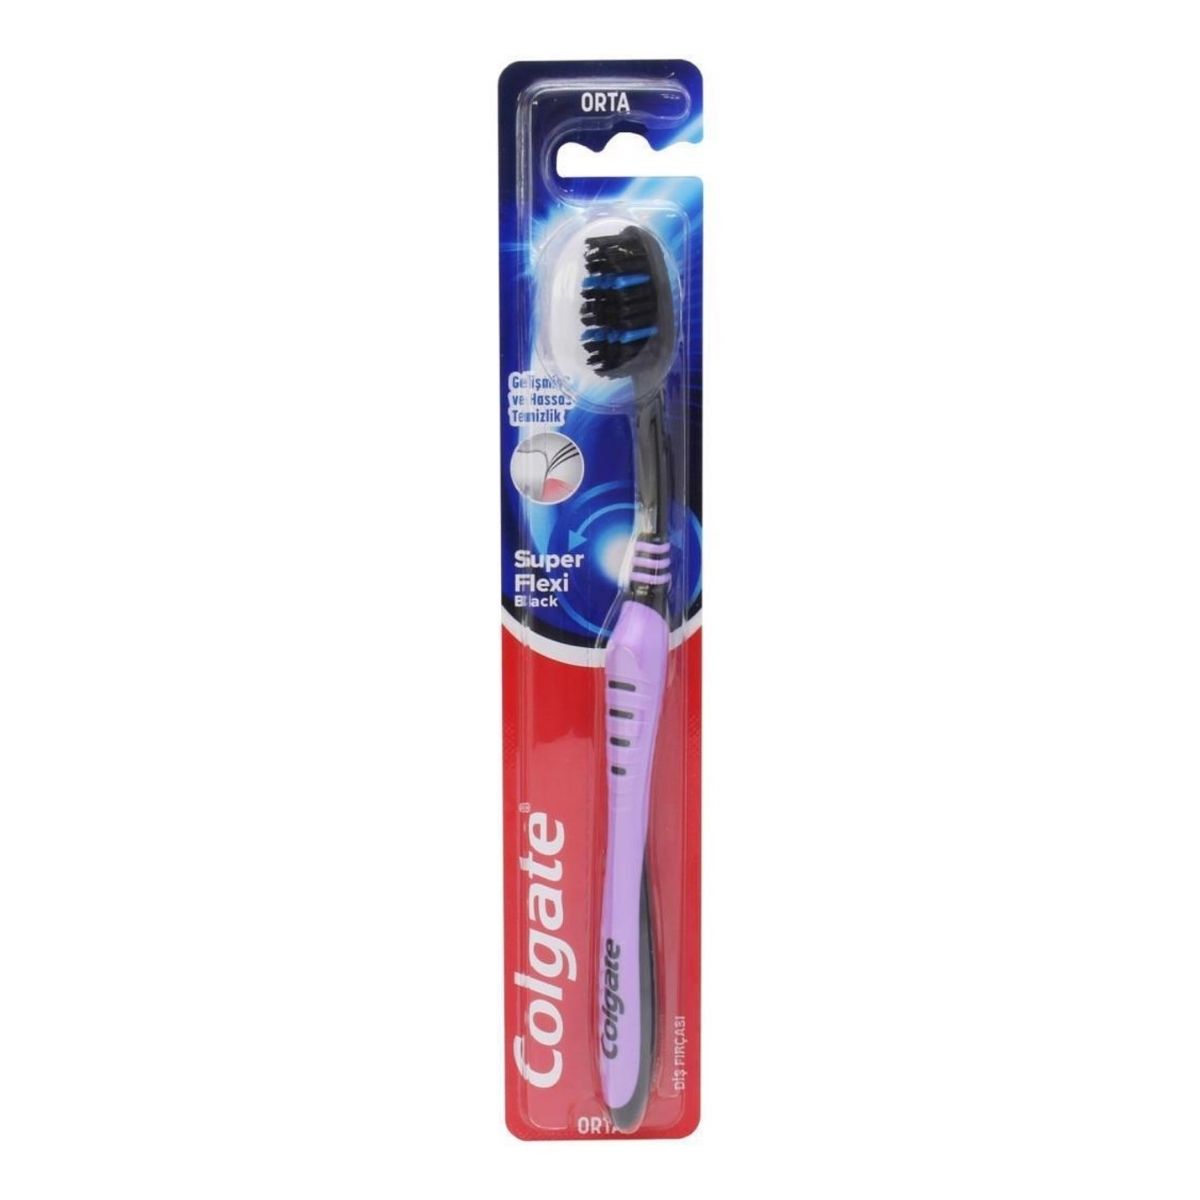 A purple and black Colgate - Super Flexi toothbrush in a package.